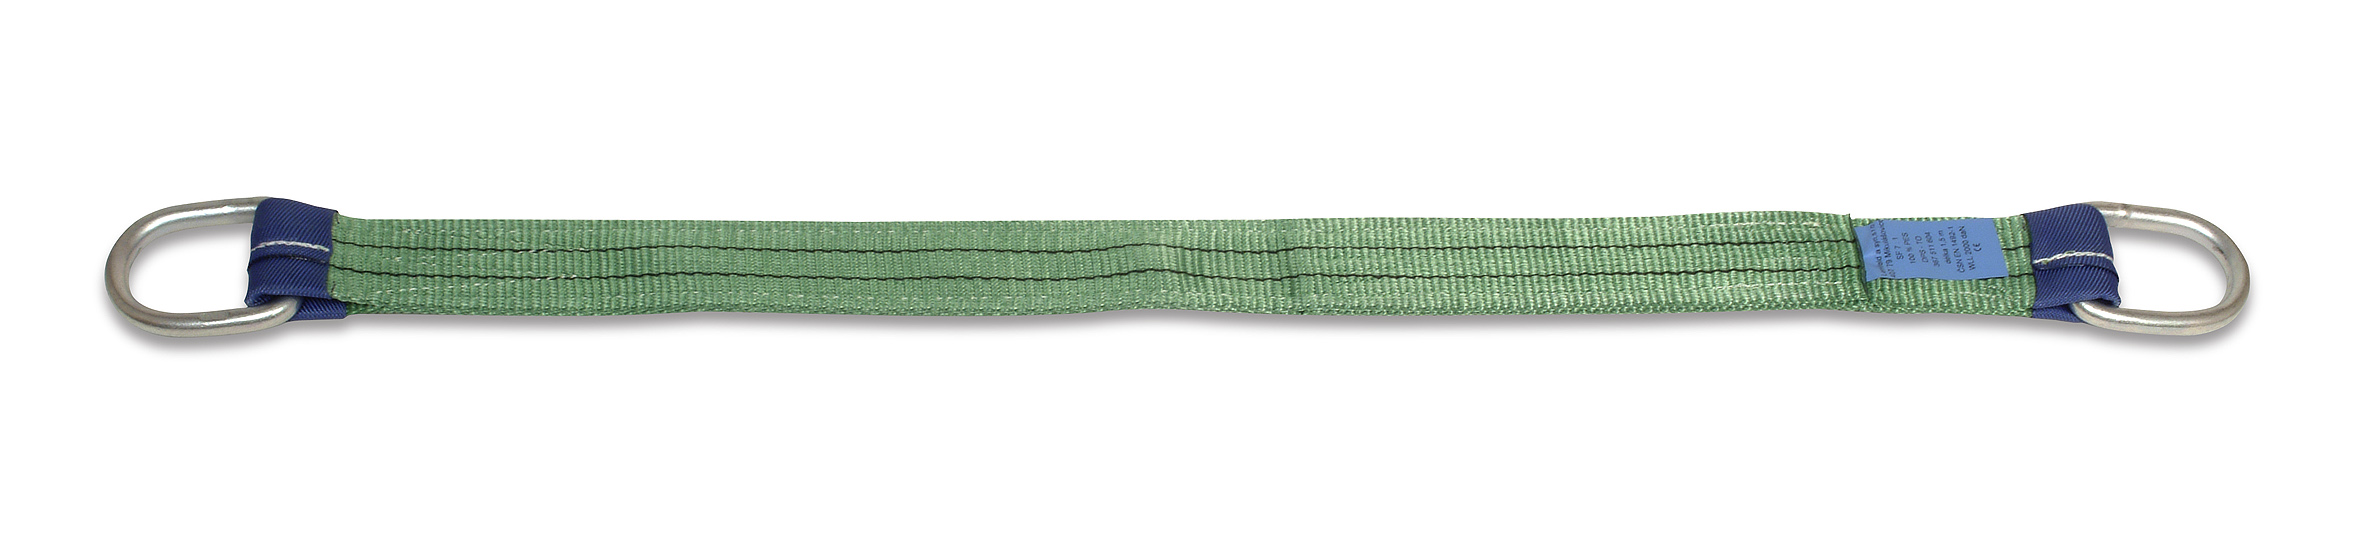 Two layer harness strap with metal slings